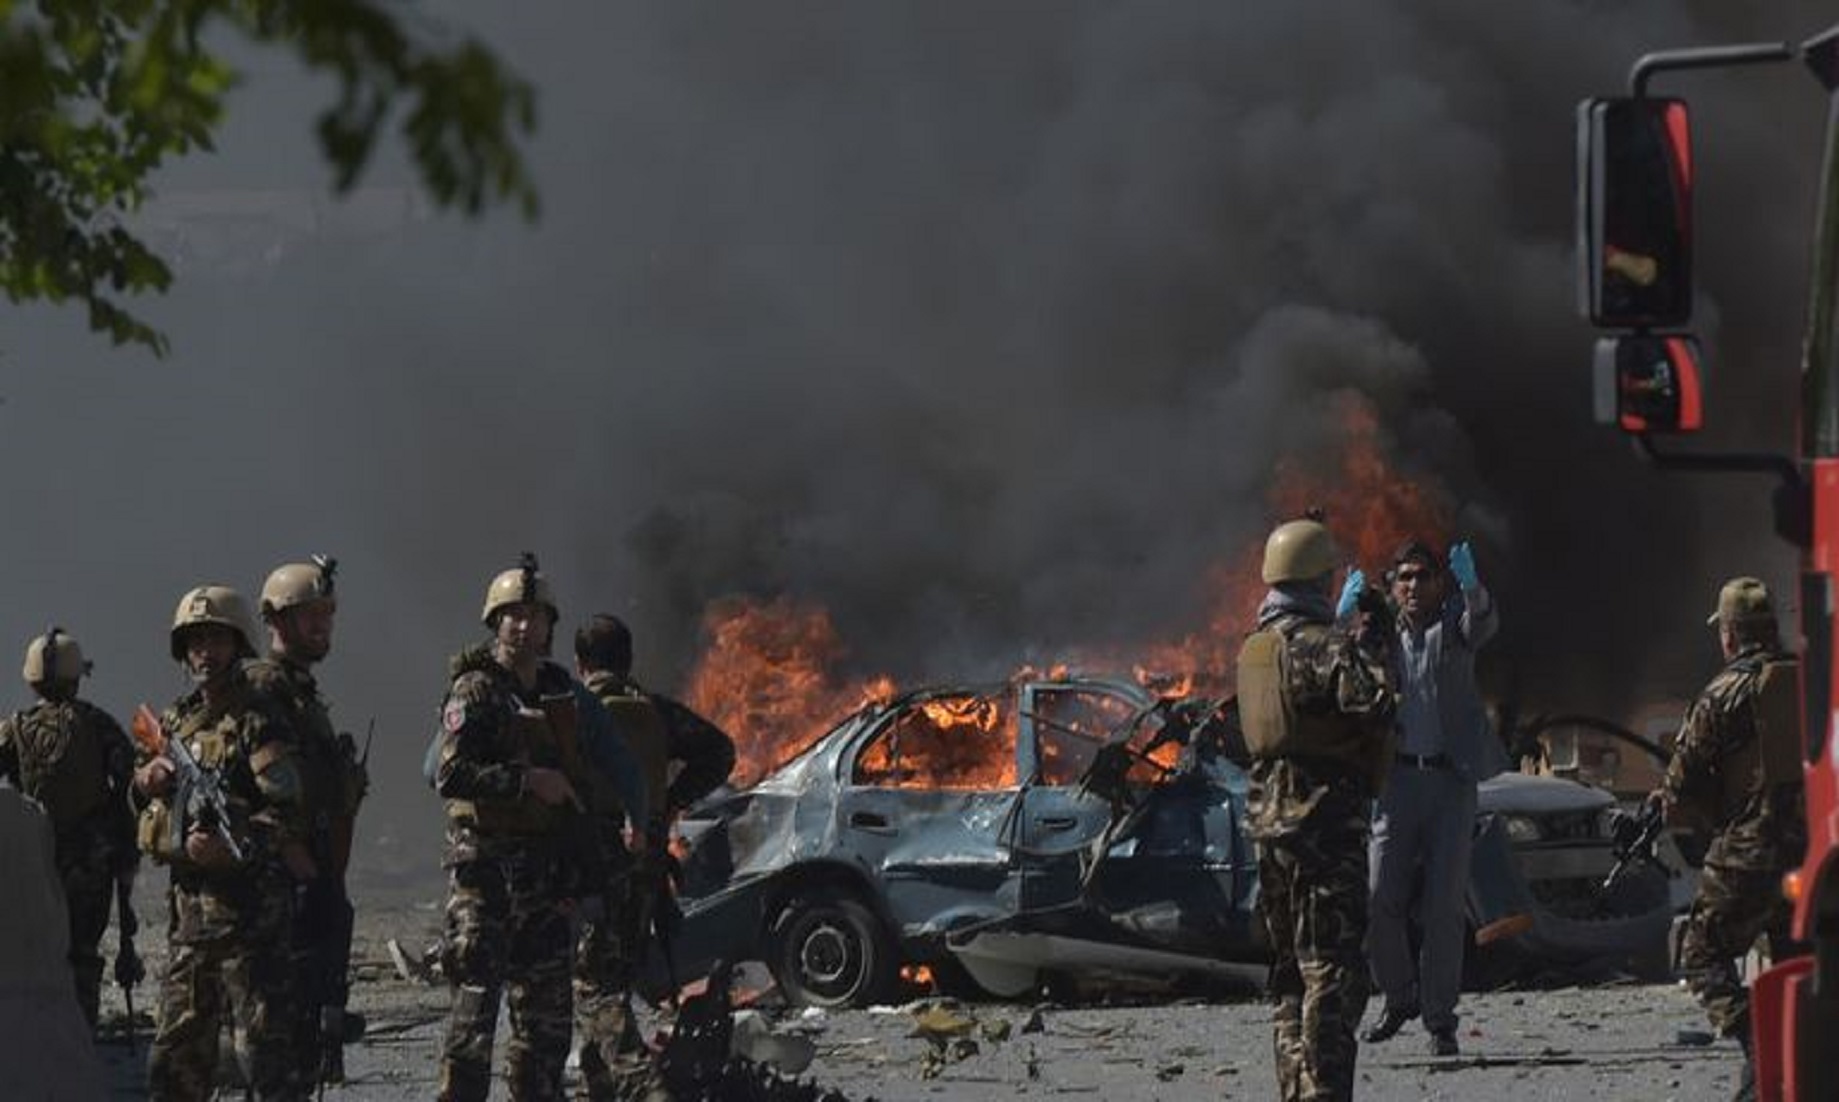 Update: At Least 30 Killed, 24 Wounded In Suicide Car Bomb Explosion In E. Afghanistan